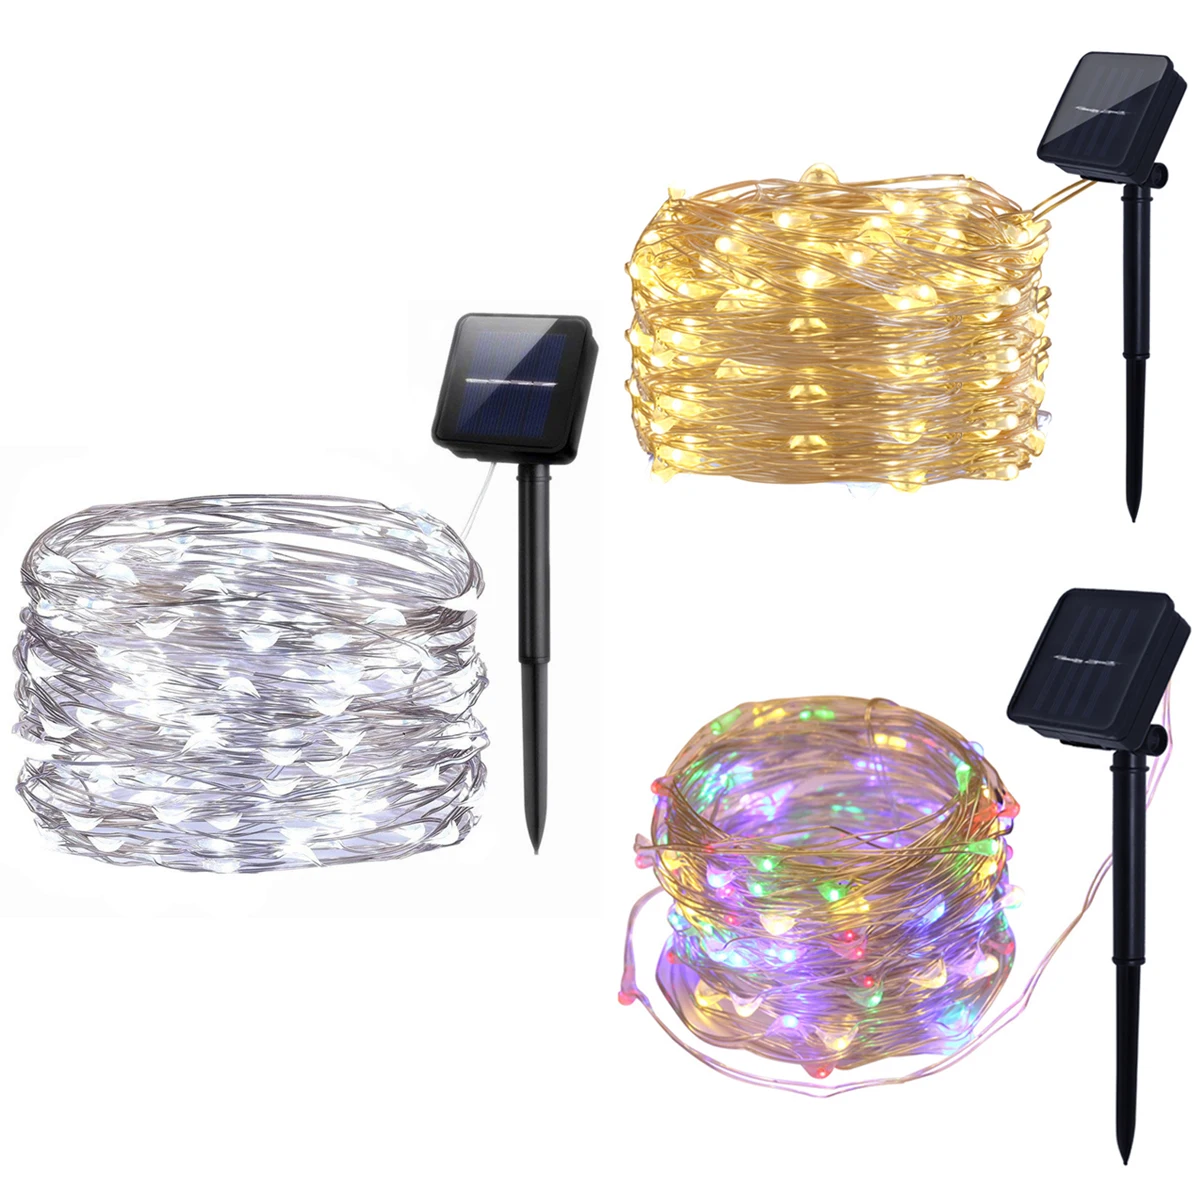 

Solar String Lights, 10M 100LED Outdoor String Lights, Waterproof Decorative String Lights For Patio, Garden, Gate, Yard, Party,